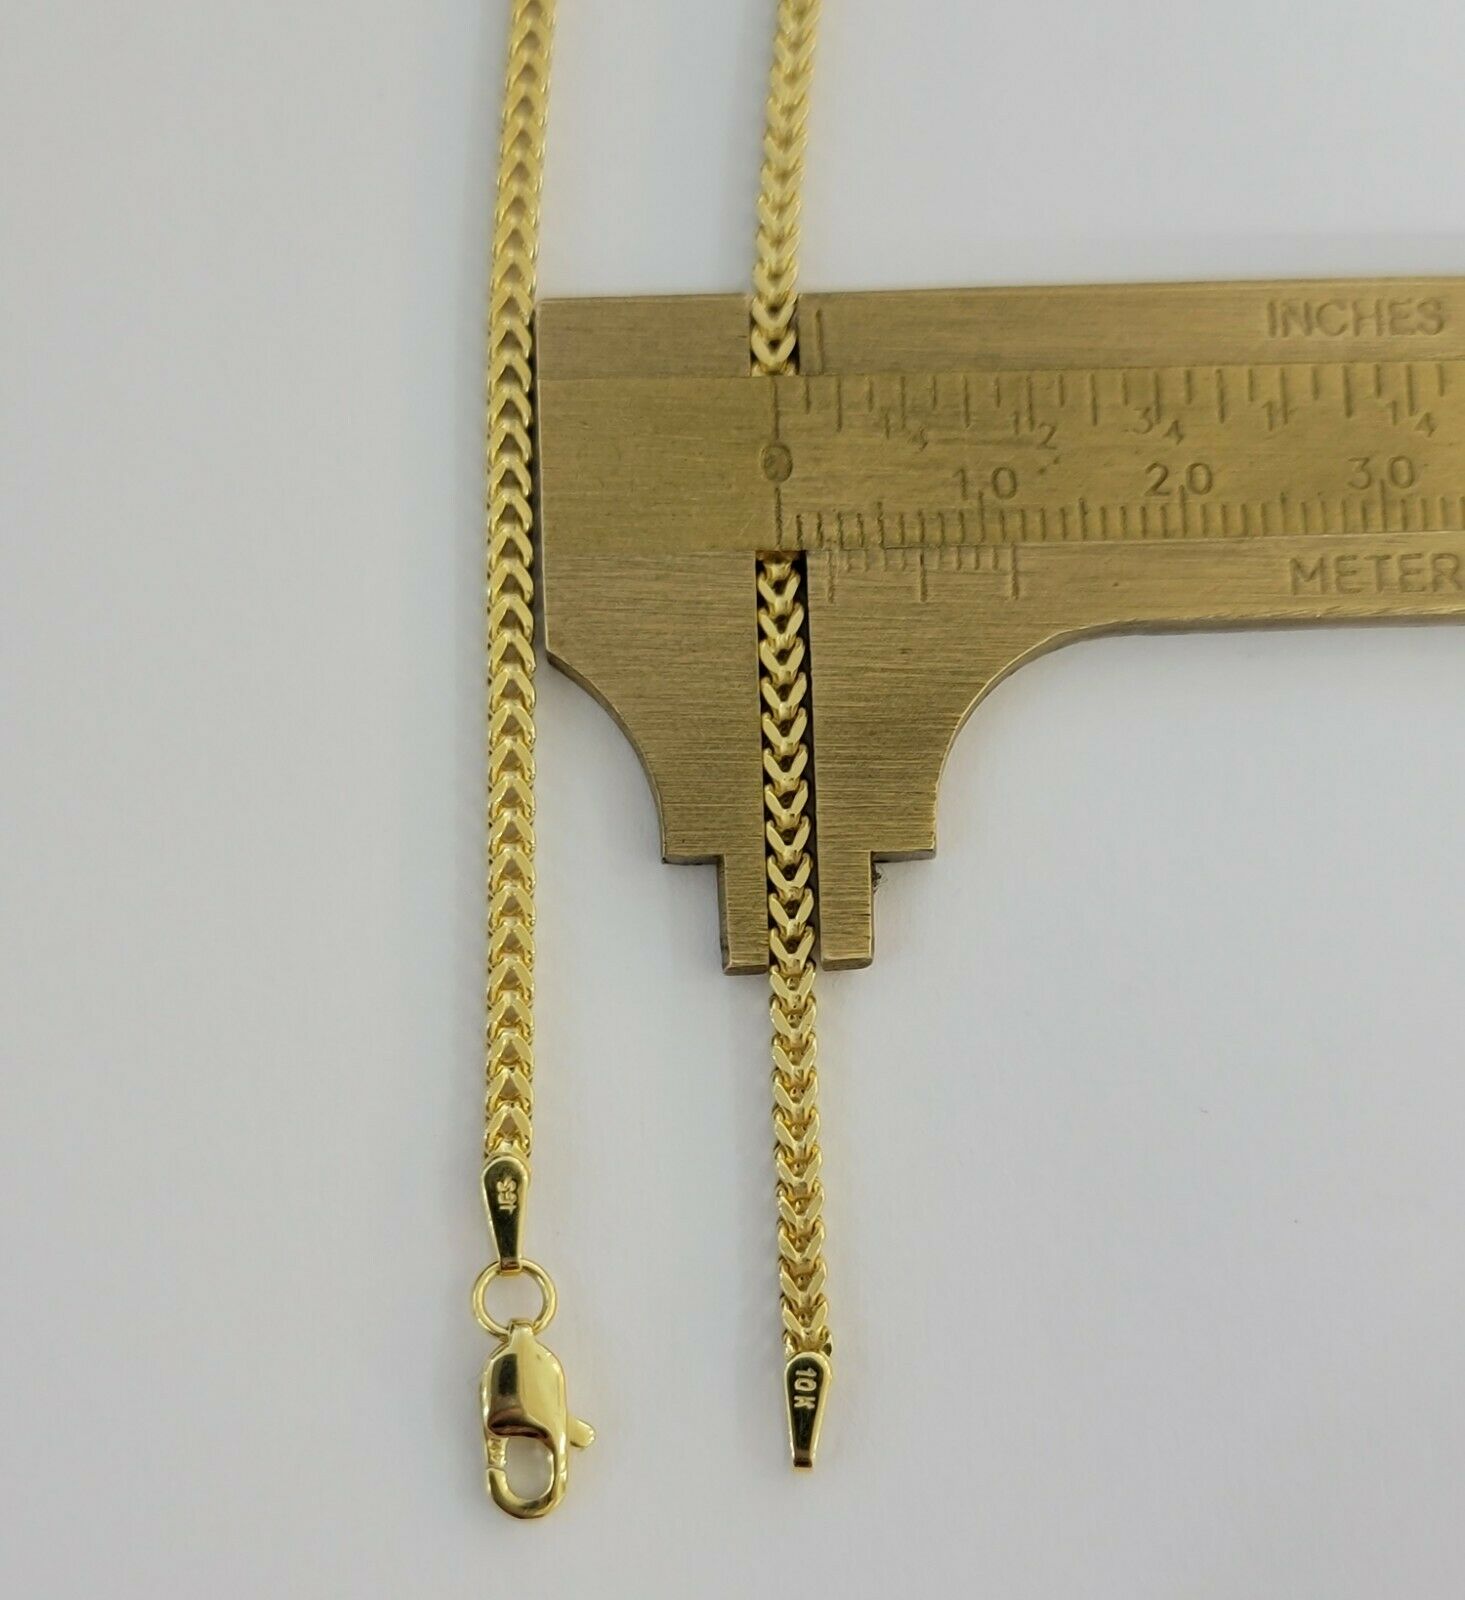 Real 10k Yellow Gold chain Franco 16-26